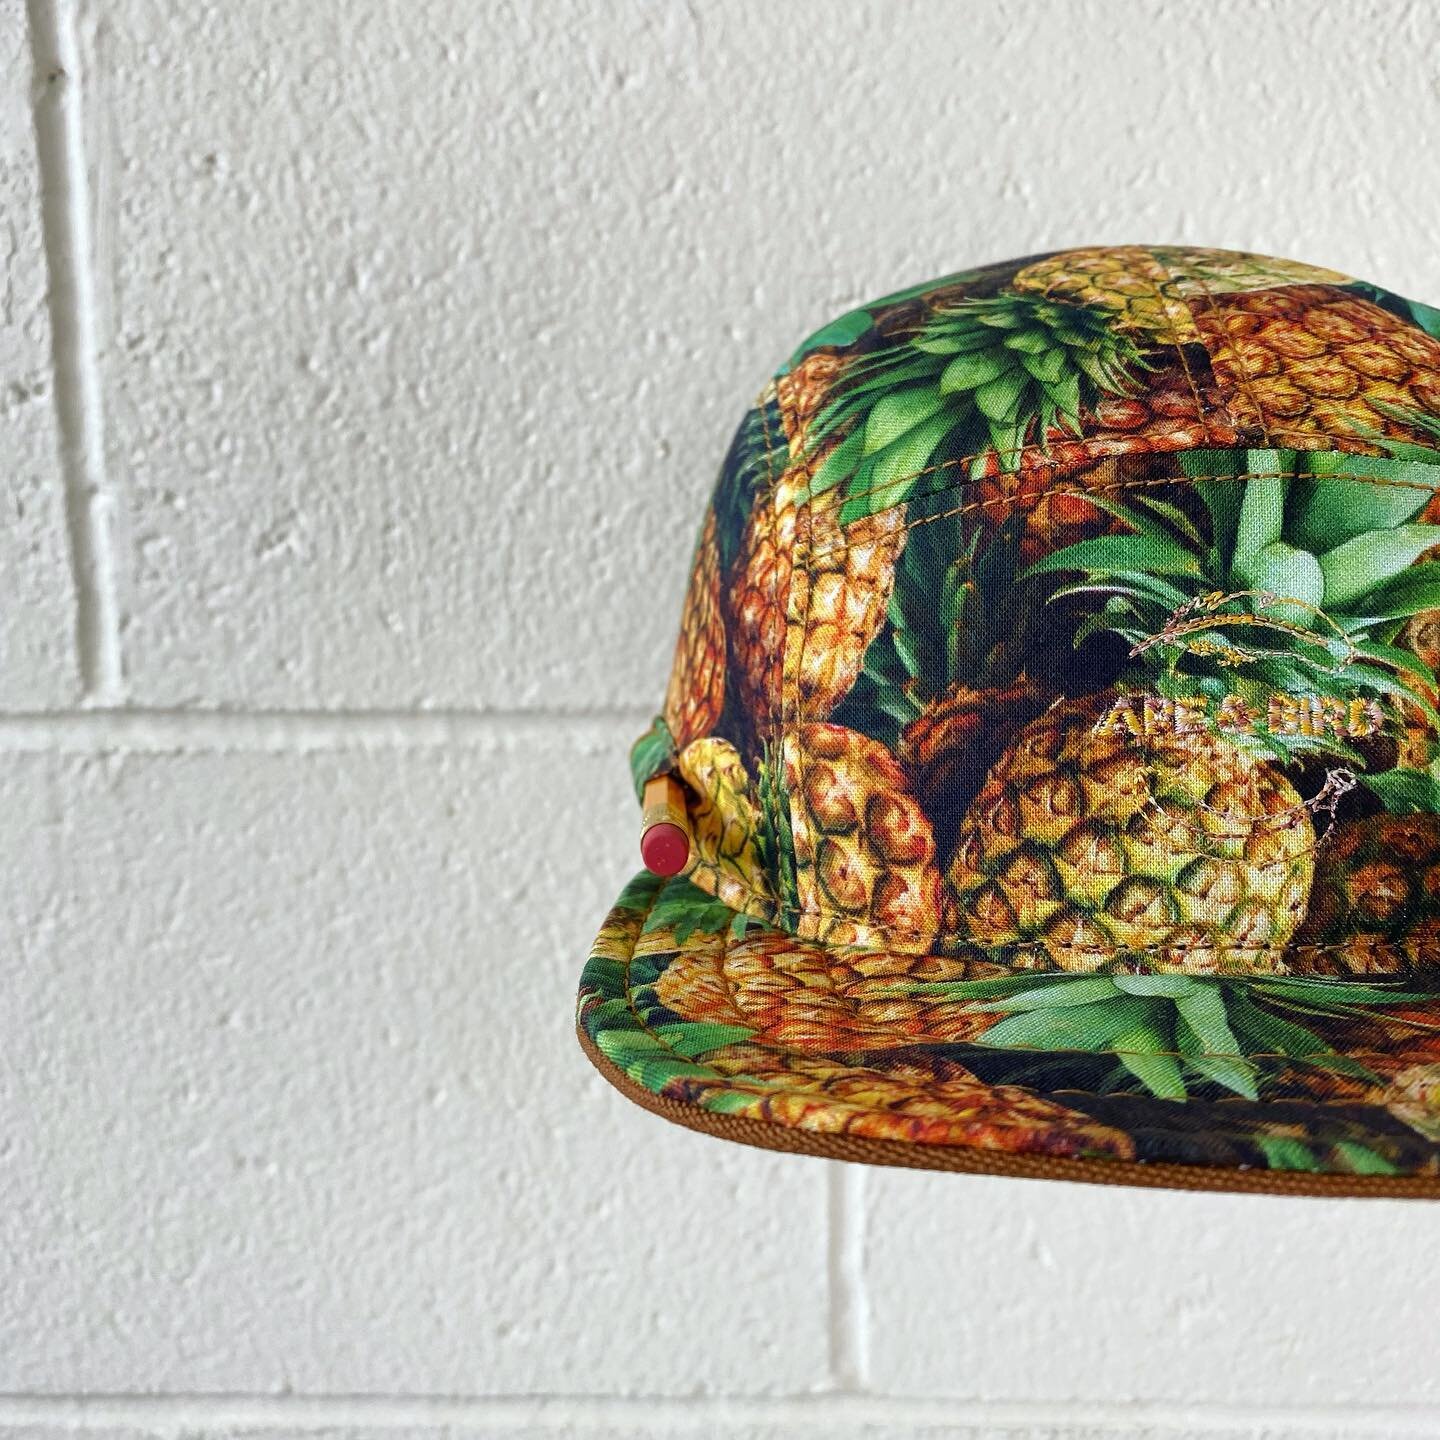 &bull;Couple pineapple July hat of the month left online.

&bull;They will stay up for month or until we are out of fabric. 

&bull;XLs available 

&bull;For any new friends here : HI and thank you for following us along. The #HOTM is our monthly ser